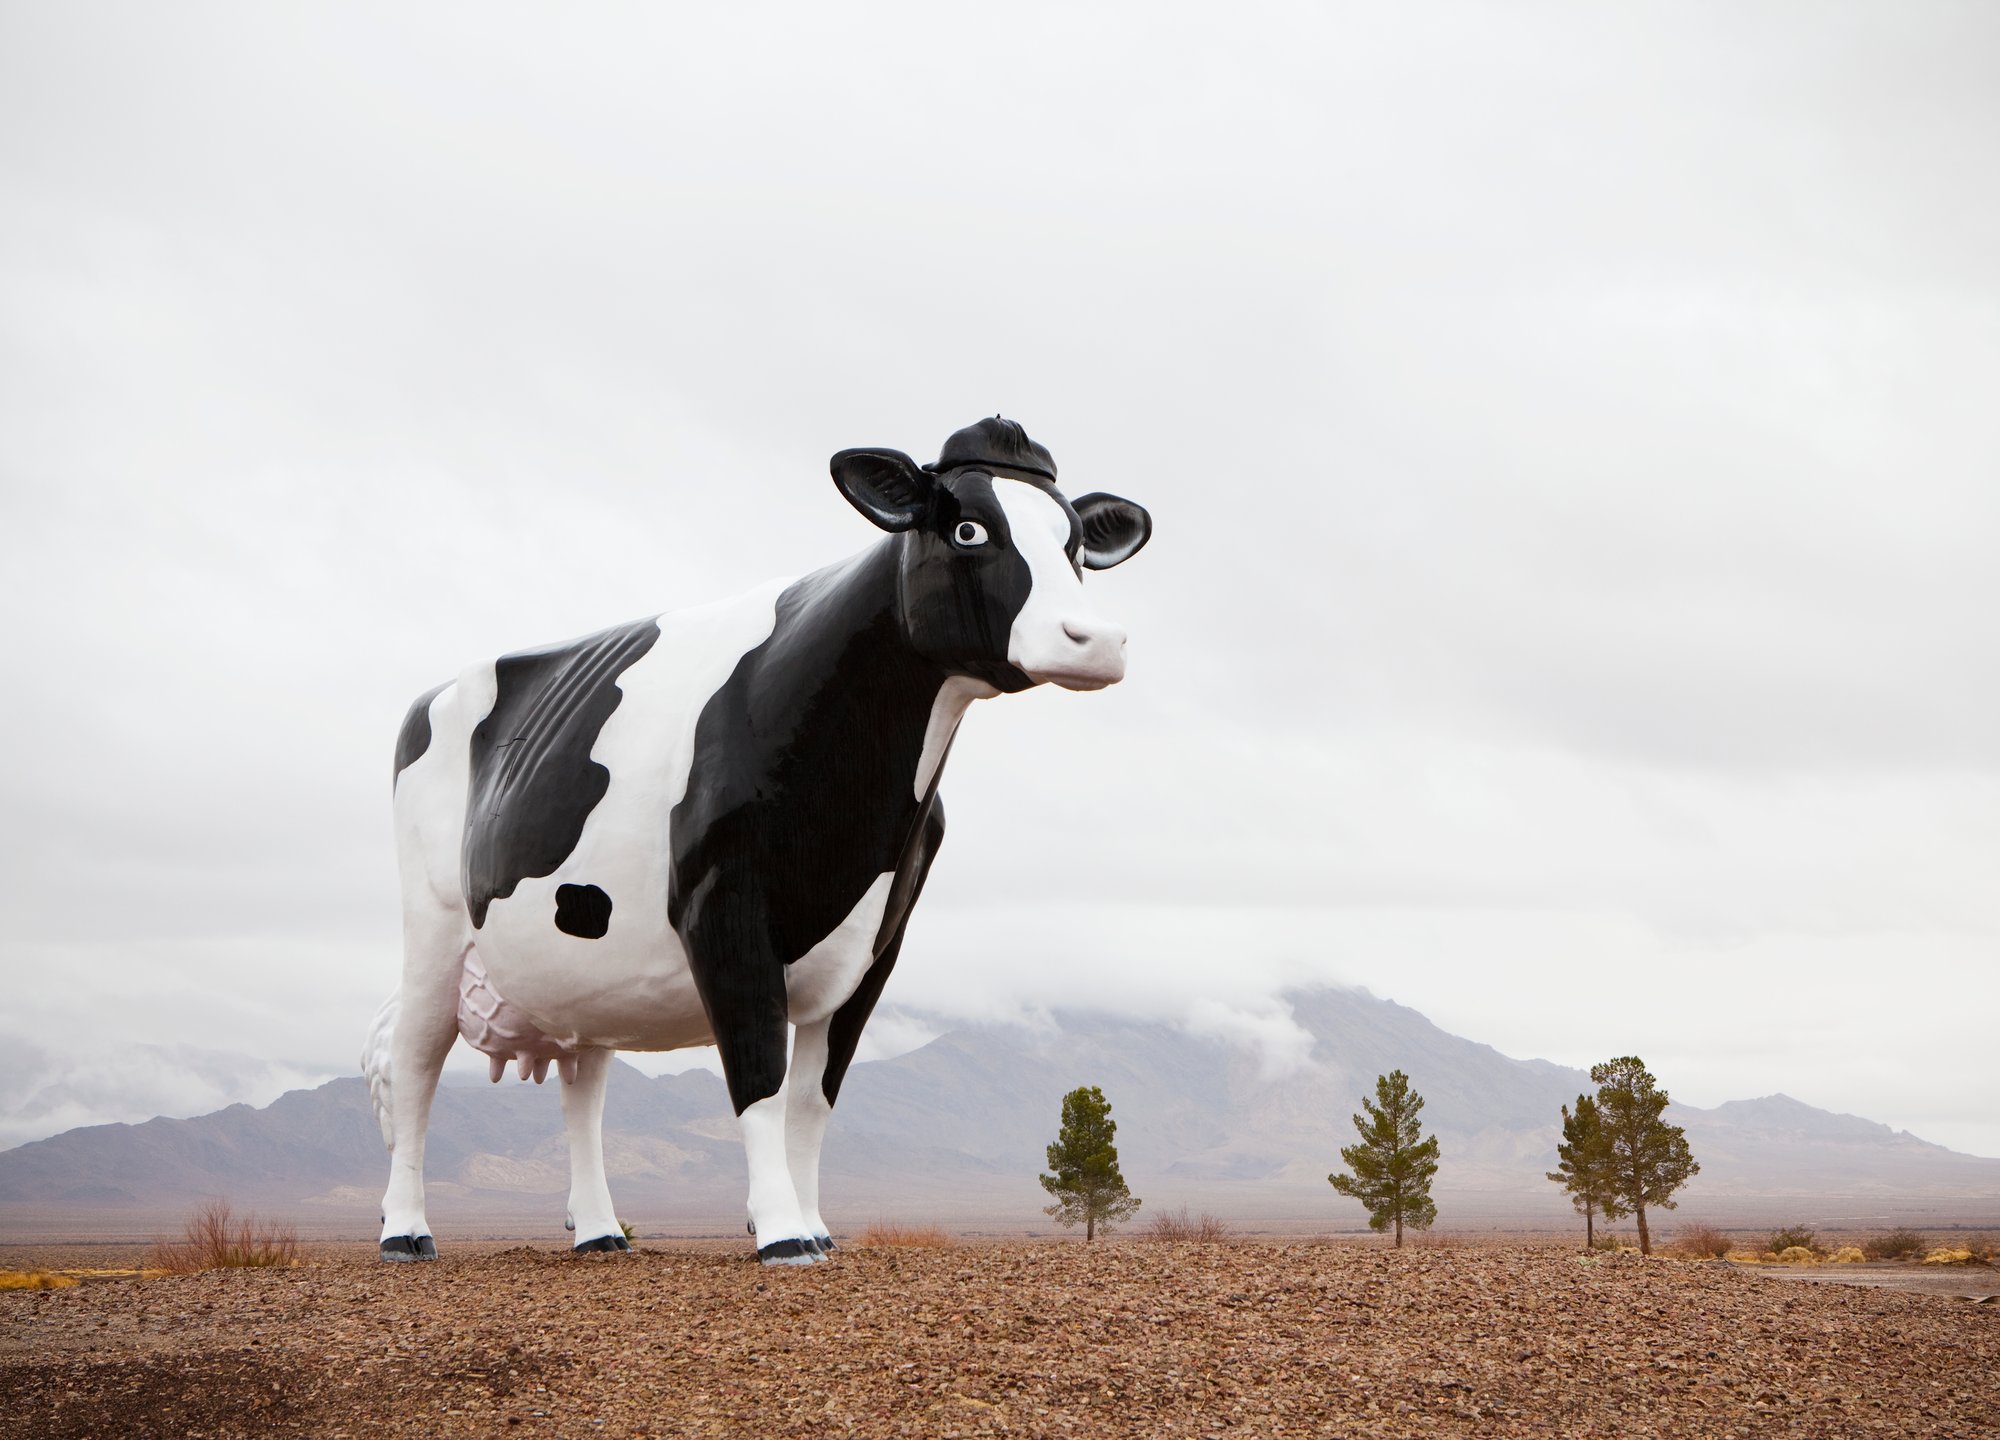 large-model-of-a-black-and-white-cow-in-open-lands-2023-11-27-05-22-23-utc